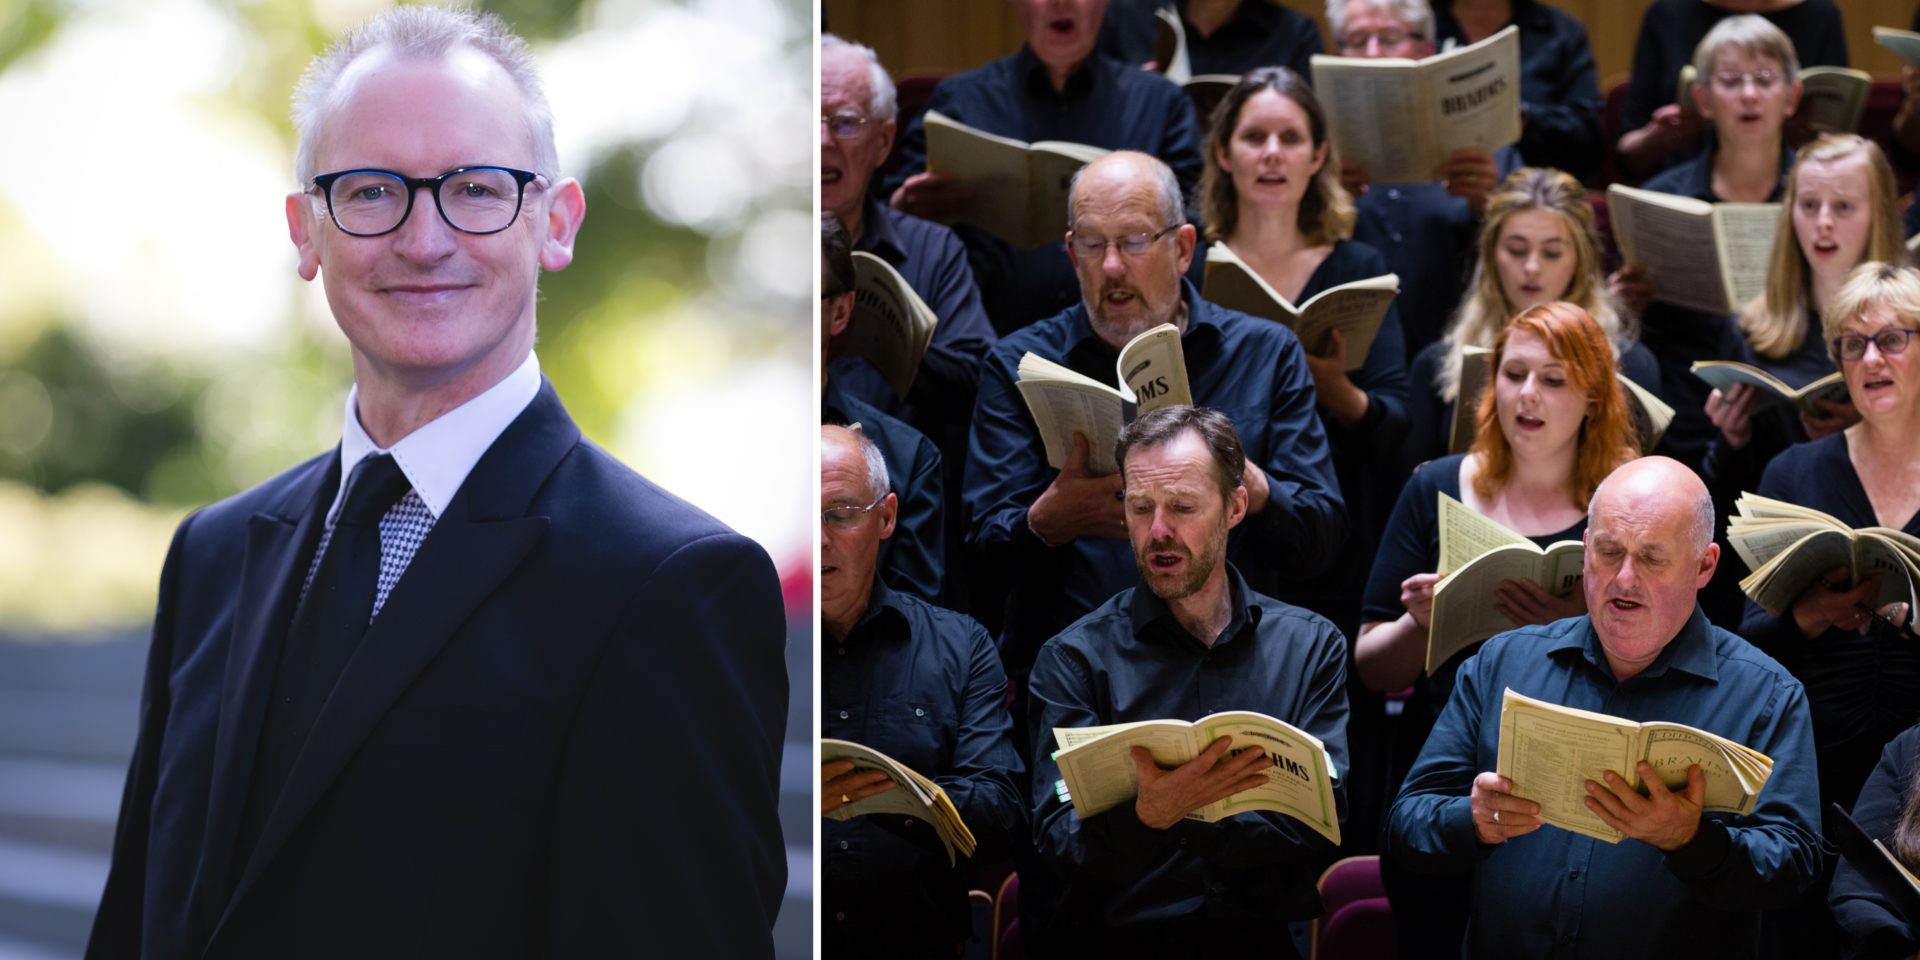 Get to know our new Chorus Director Stephen Doughty